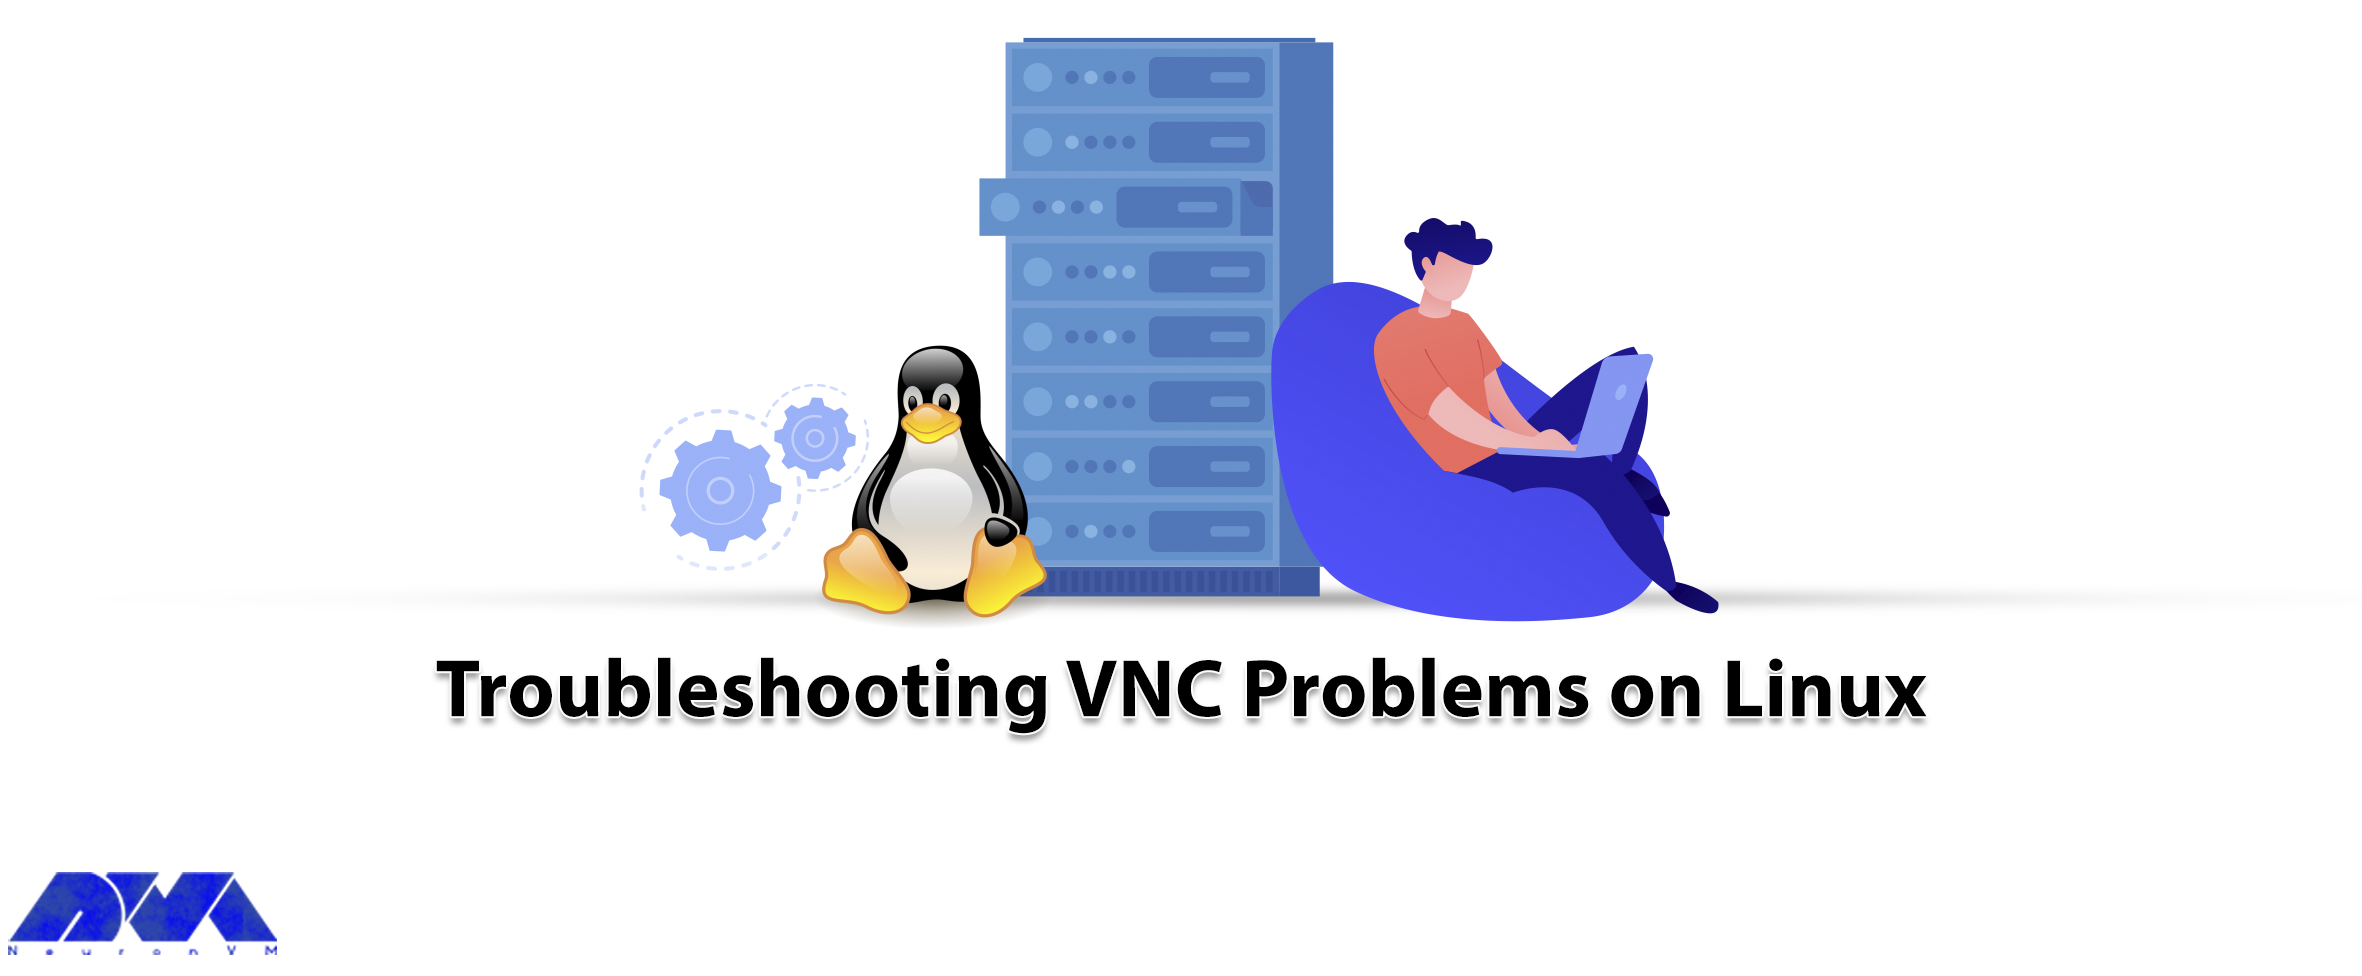 Troubleshooting VNC Problems on Linux